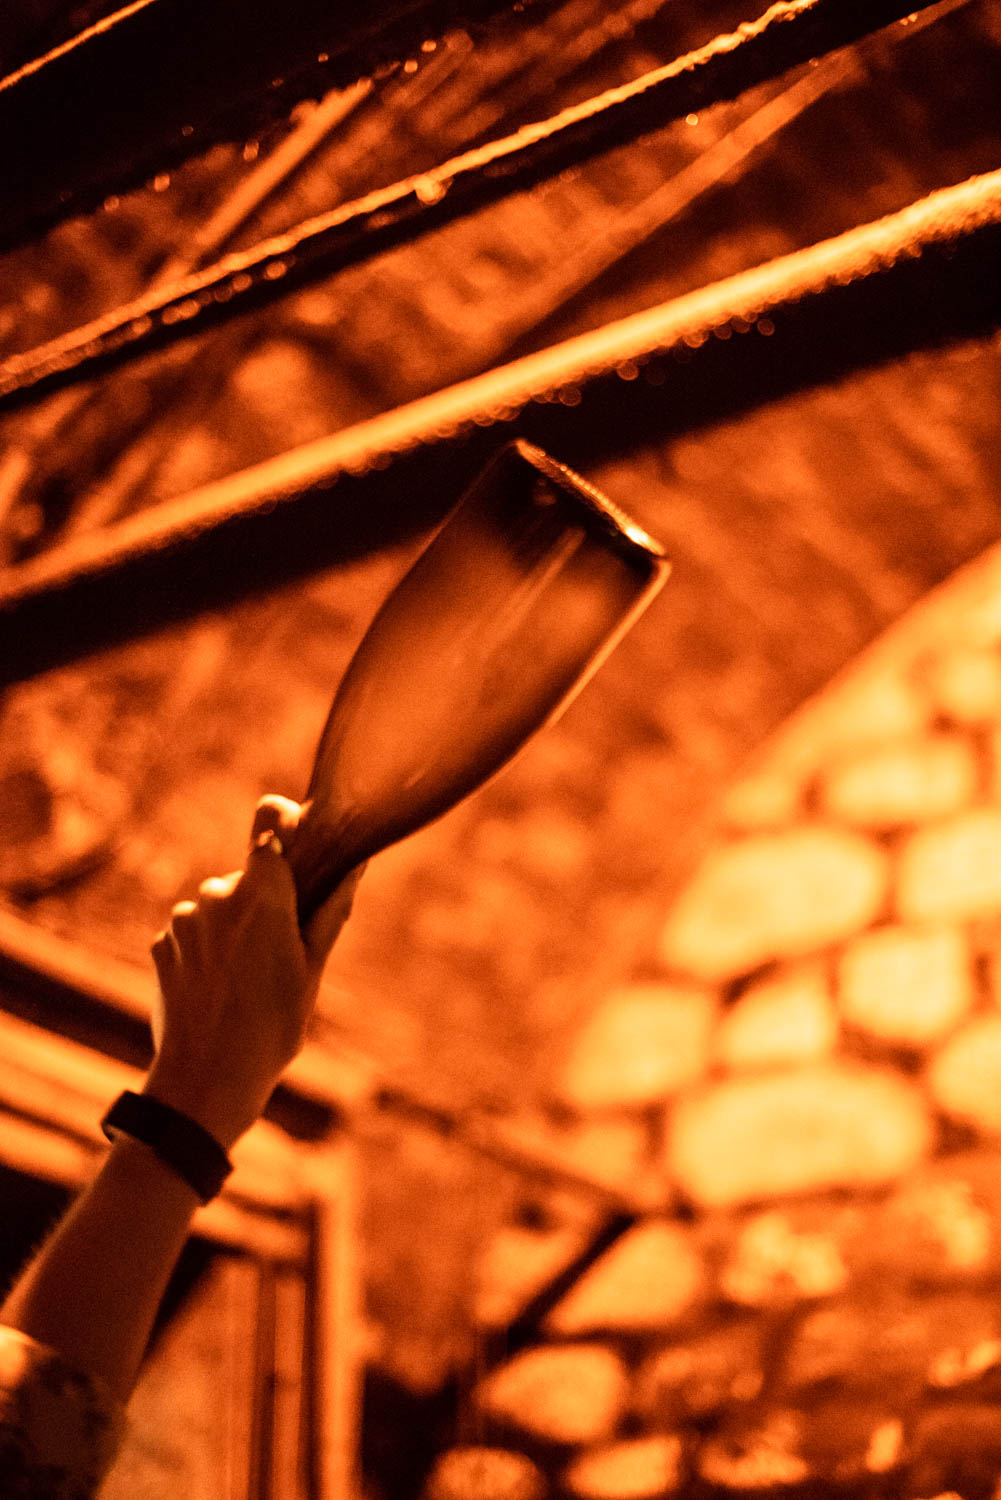 Champagne bottle held up to the light showing the lees deposit before disgorging